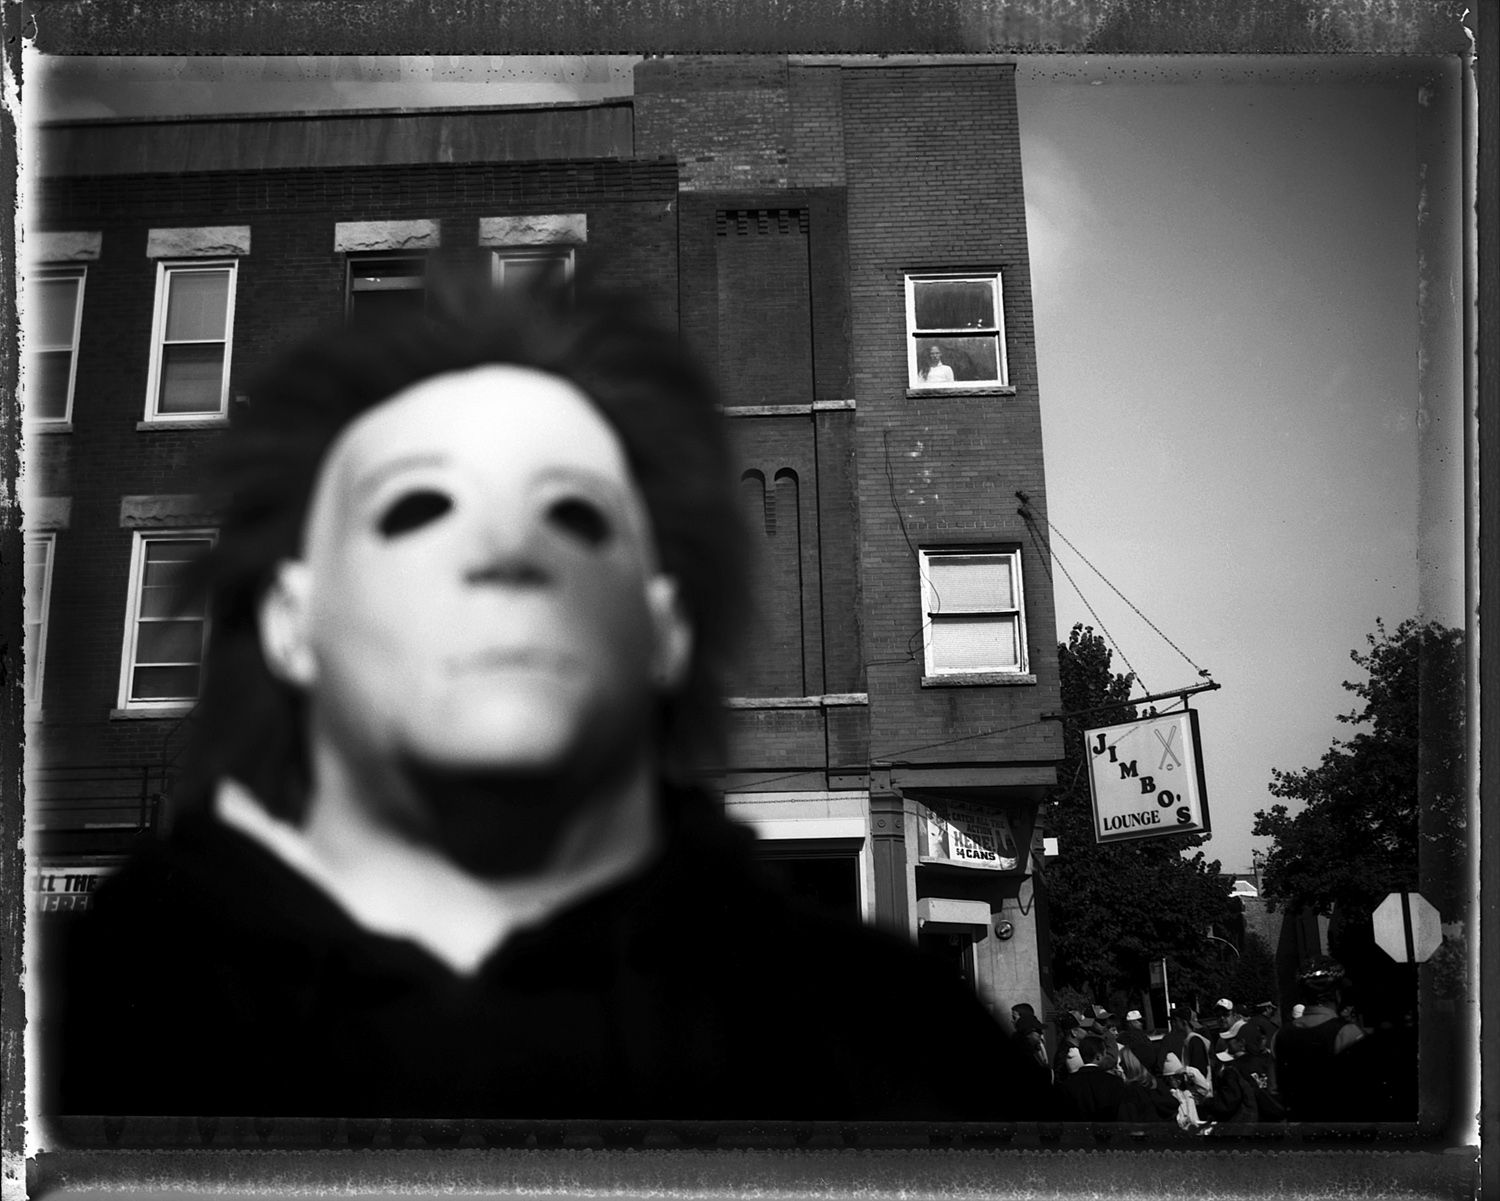 A man poses wearing his mask from the Friday the 13th movies. He stand in front of Jimbo's Bar, which was a local legendary establishment in the Bridgeport neighborhood. Bridgeport, home to Mayor Richard J. Daley, was known as one of the most brutally racist neighborhoods in the city and to this day has resisted integration by African-Americans, although many Asians and Latinos have moved into the neighborhood in the past few years.